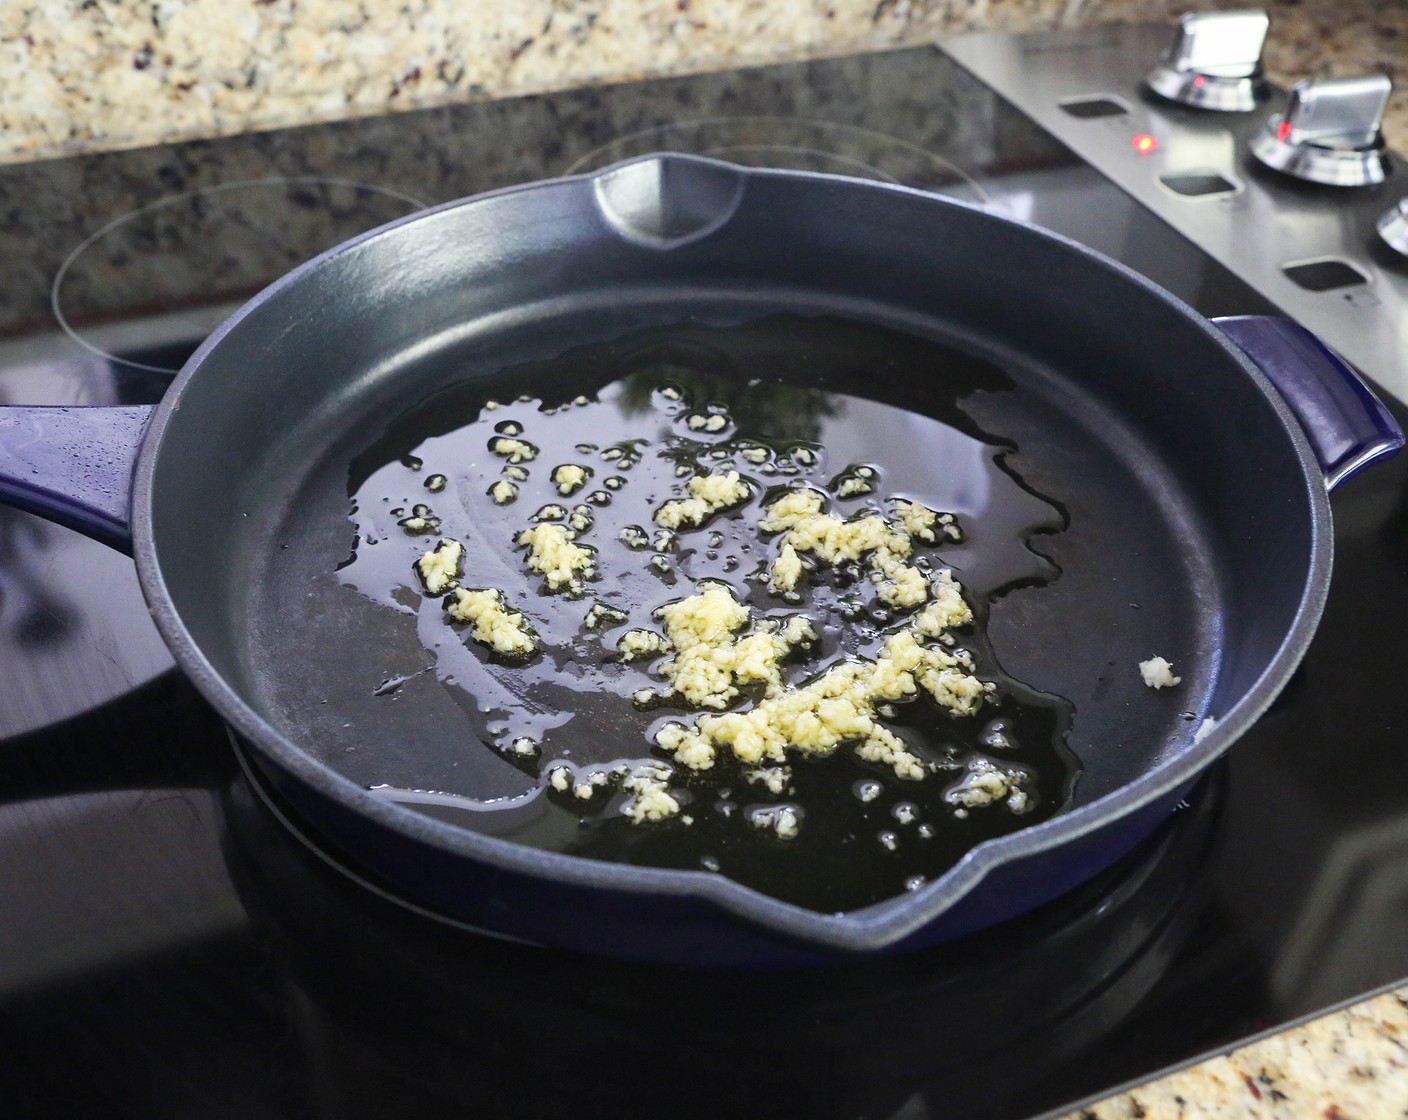 step 1 Heat Olive Oil (1/4 cup) in a cast-iron skillet over medium-high heat. Add Garlic (4 cloves) and cook, stirring frequently, for 3 minutes.